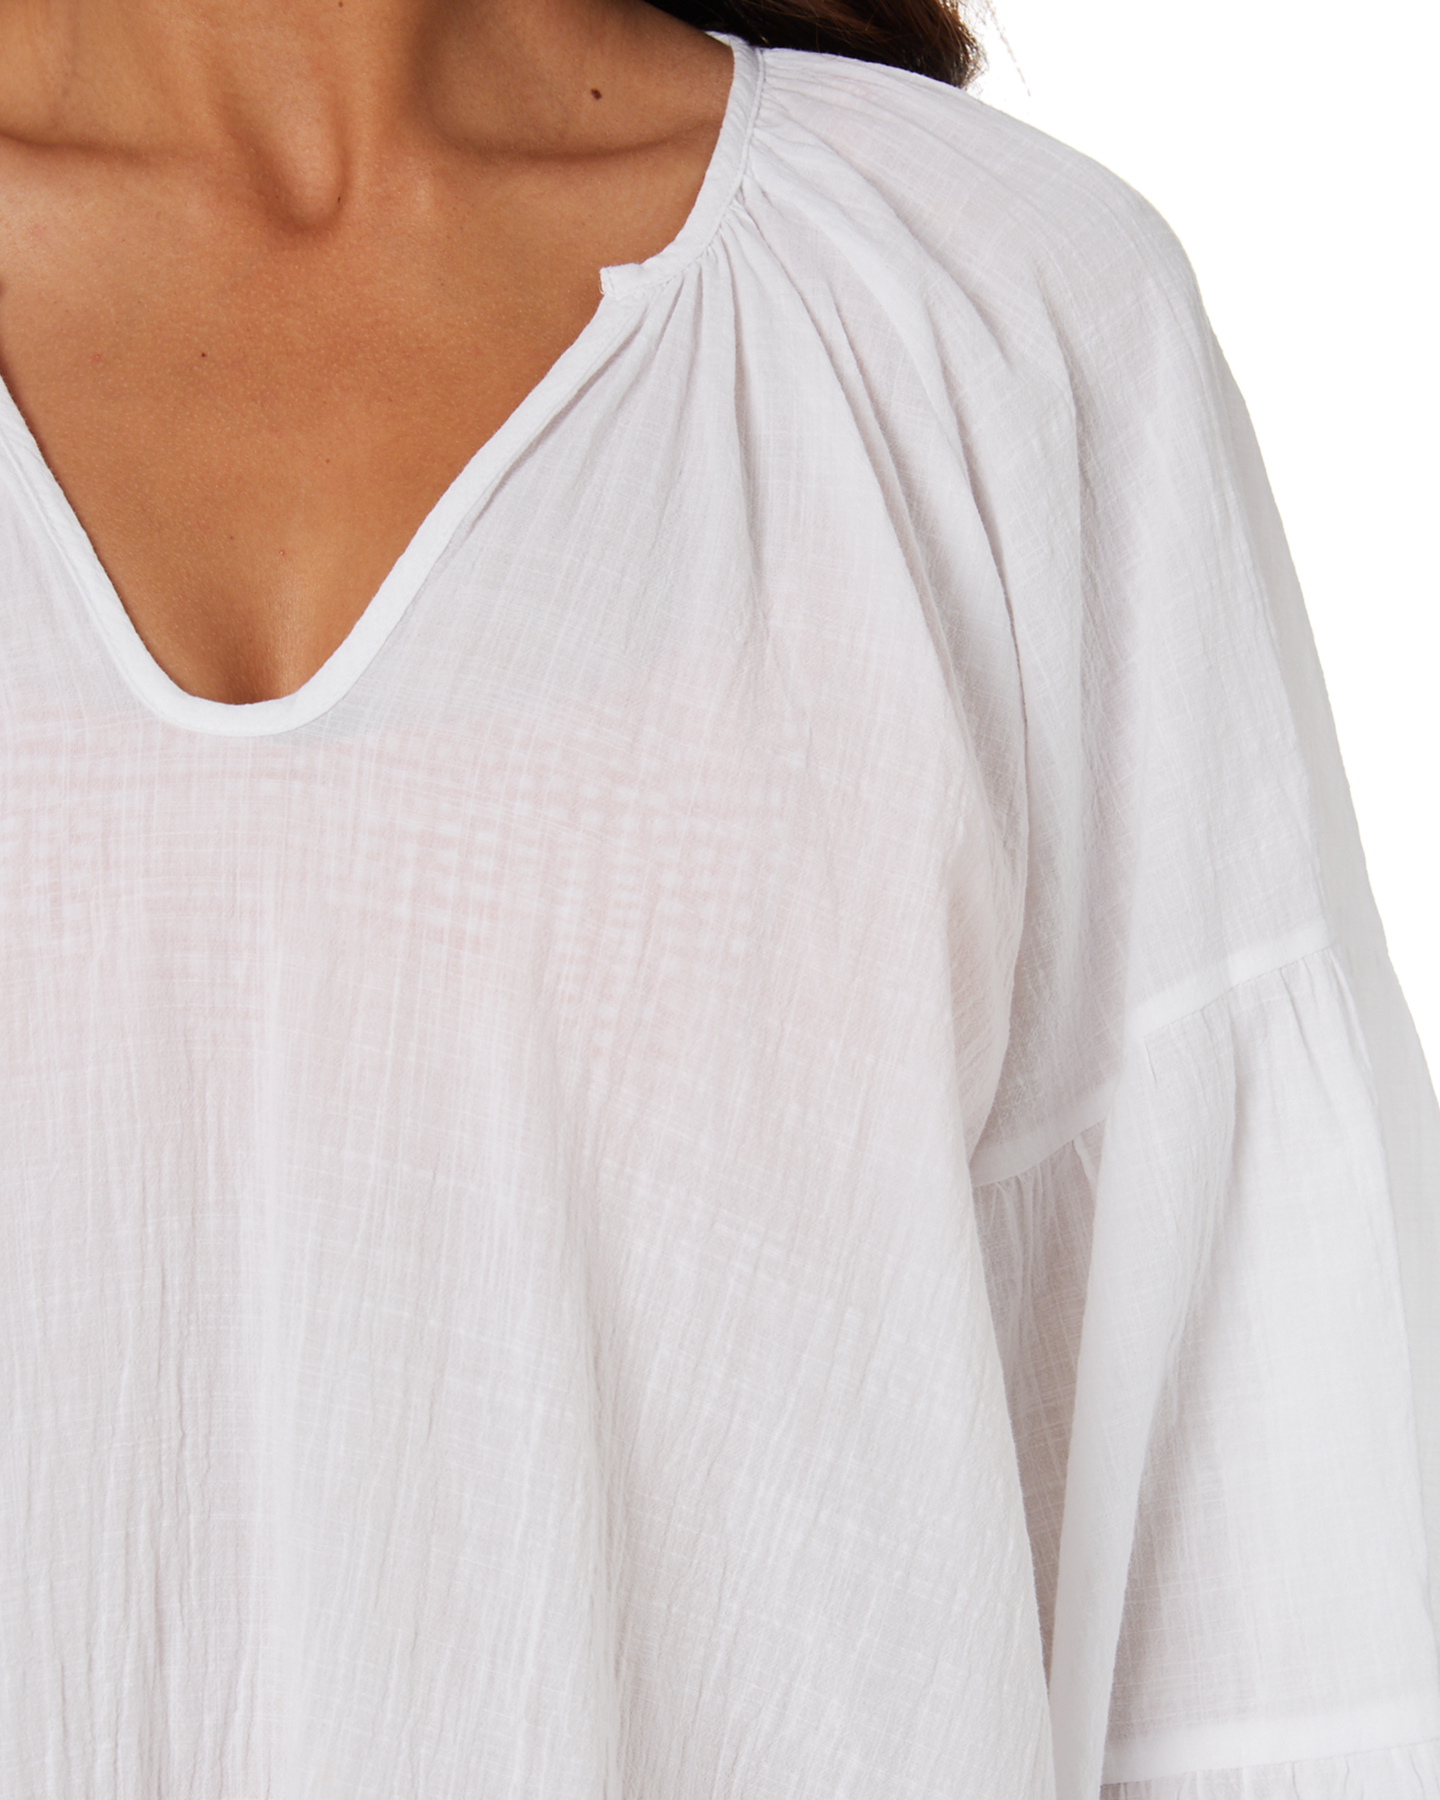 Seafolly Tiered Sleeve Cover Up - White | SurfStitch